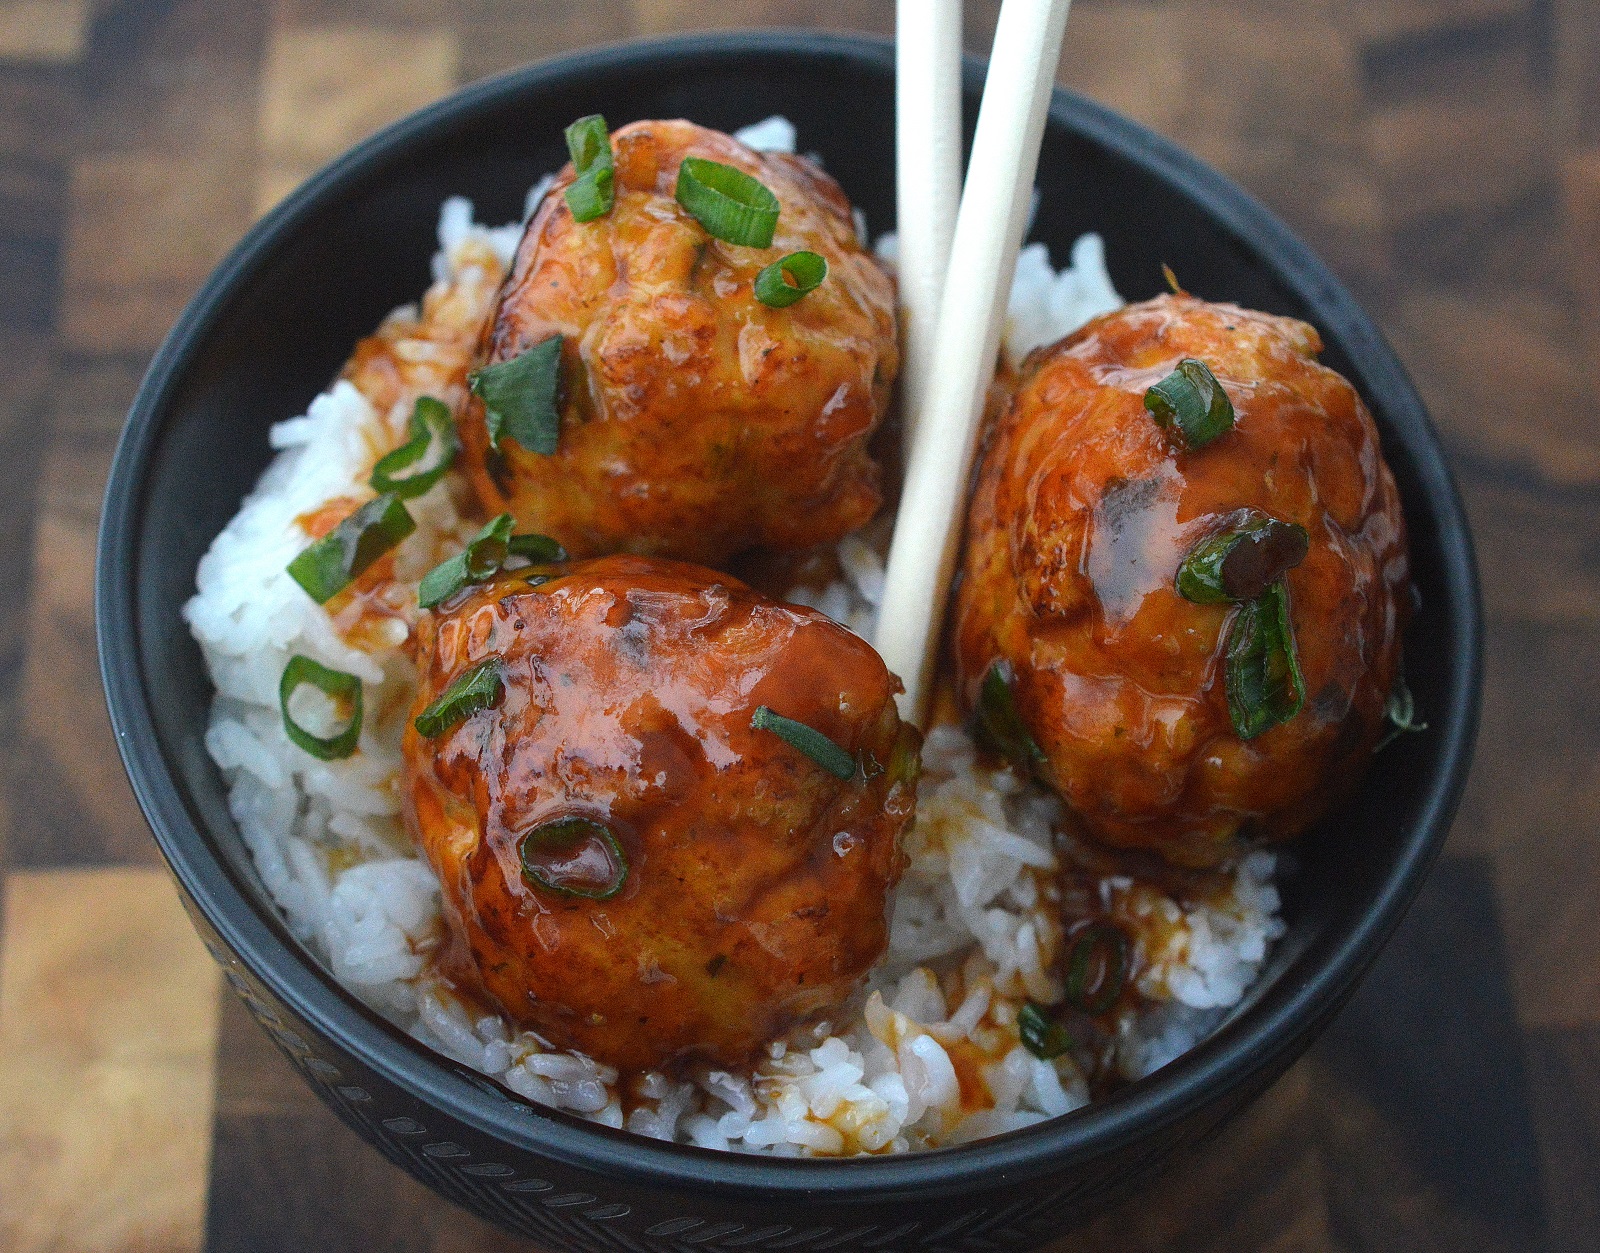 Sticky Chicken Meatballs Over Rice. A 20 minute meal full of flavor!